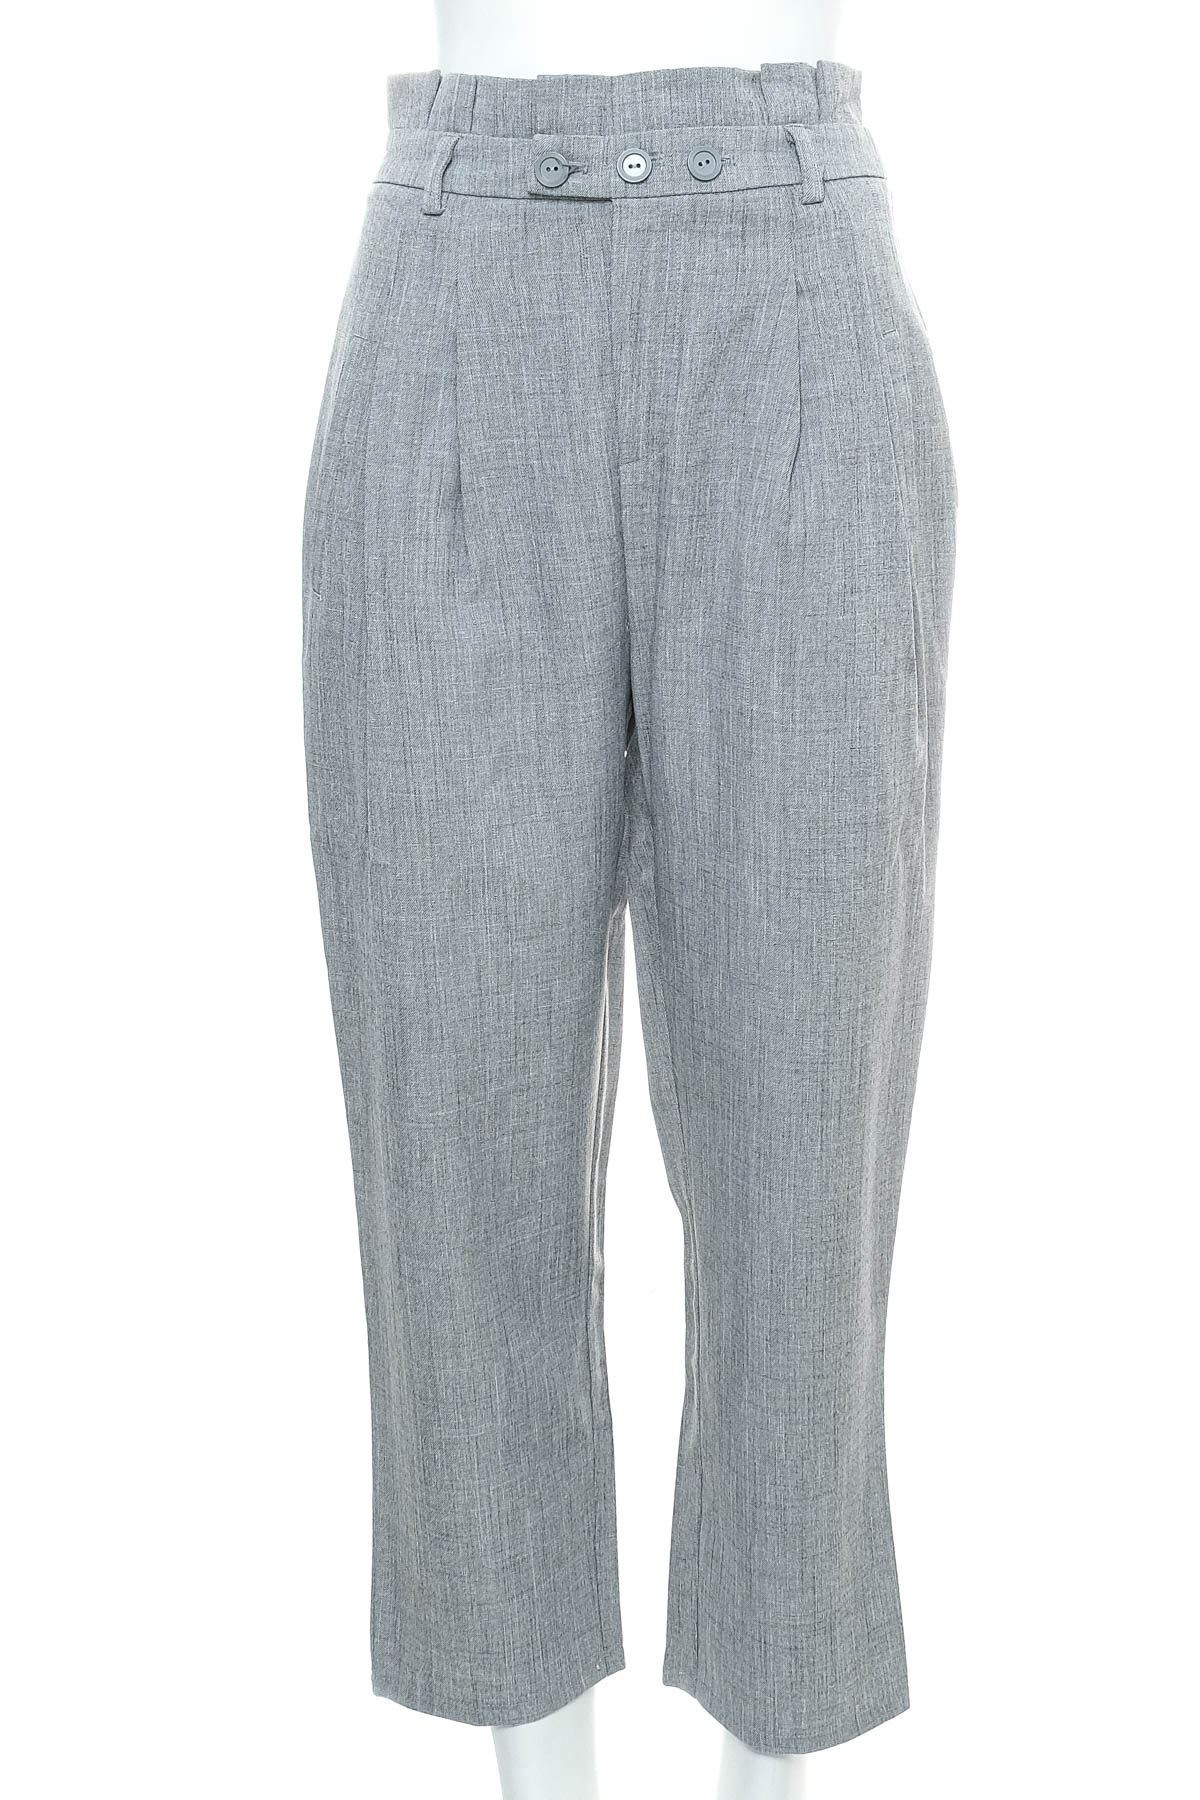 Women's trousers - Alle Hues - 0